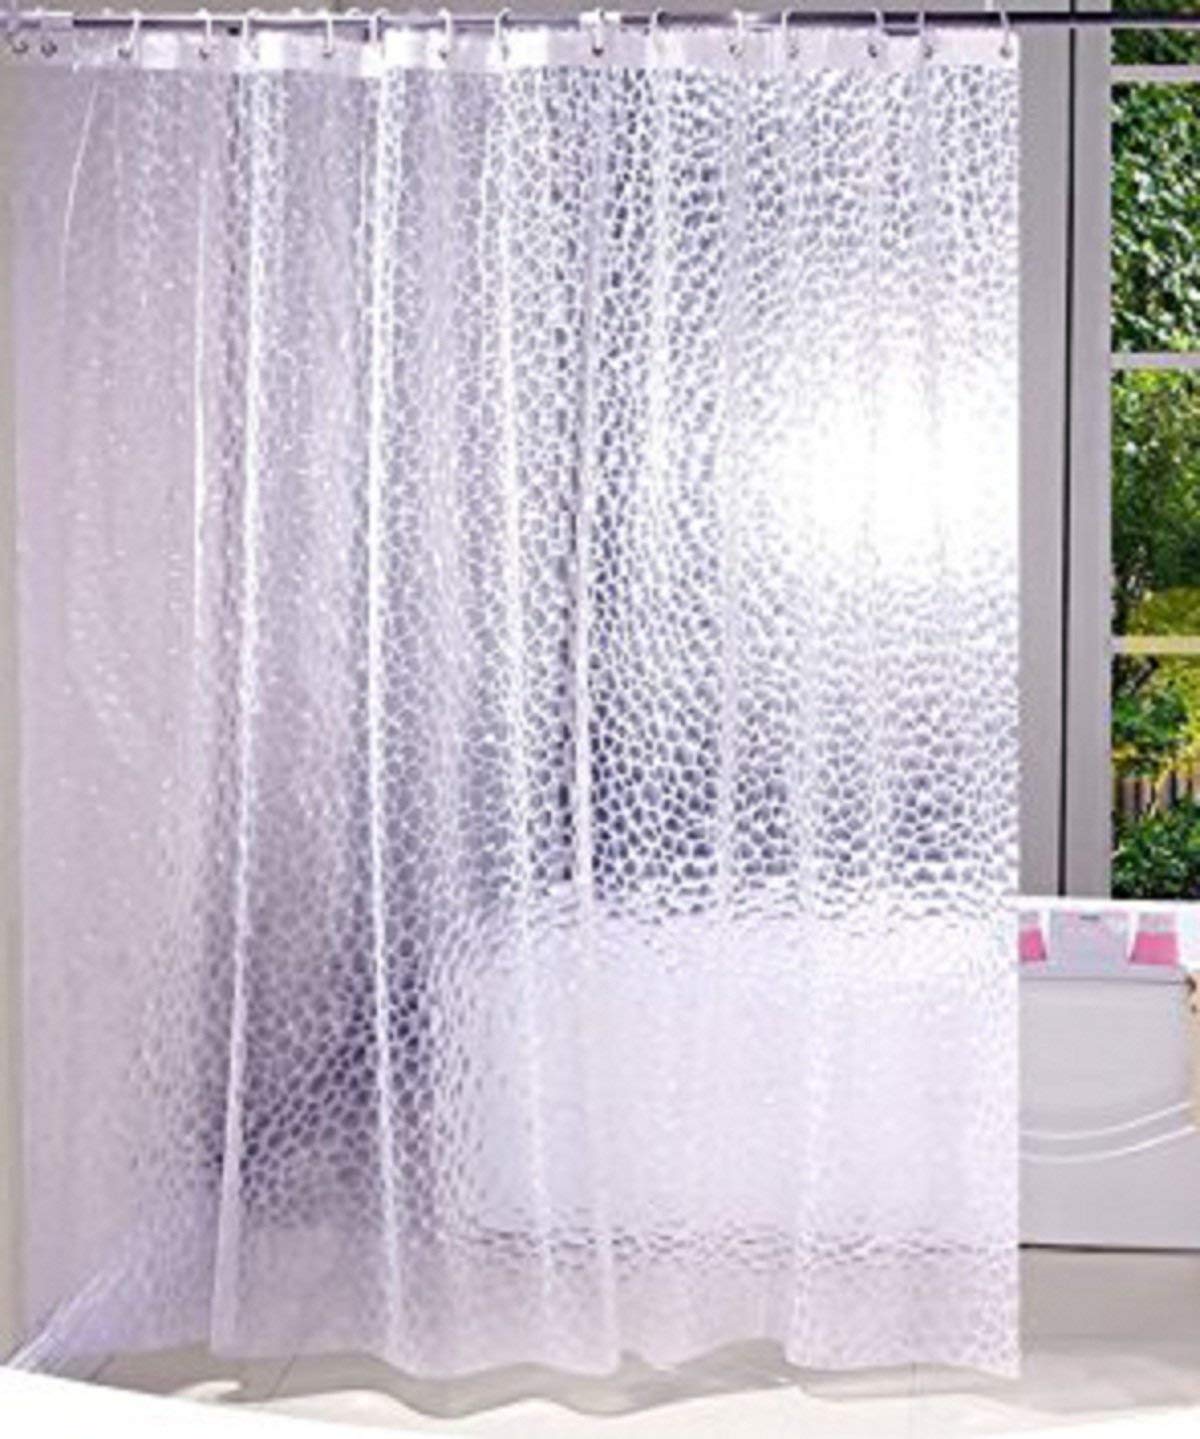 Kuber Industries PVC Solid Shower Curtain 8Ft (Transparent), Washable